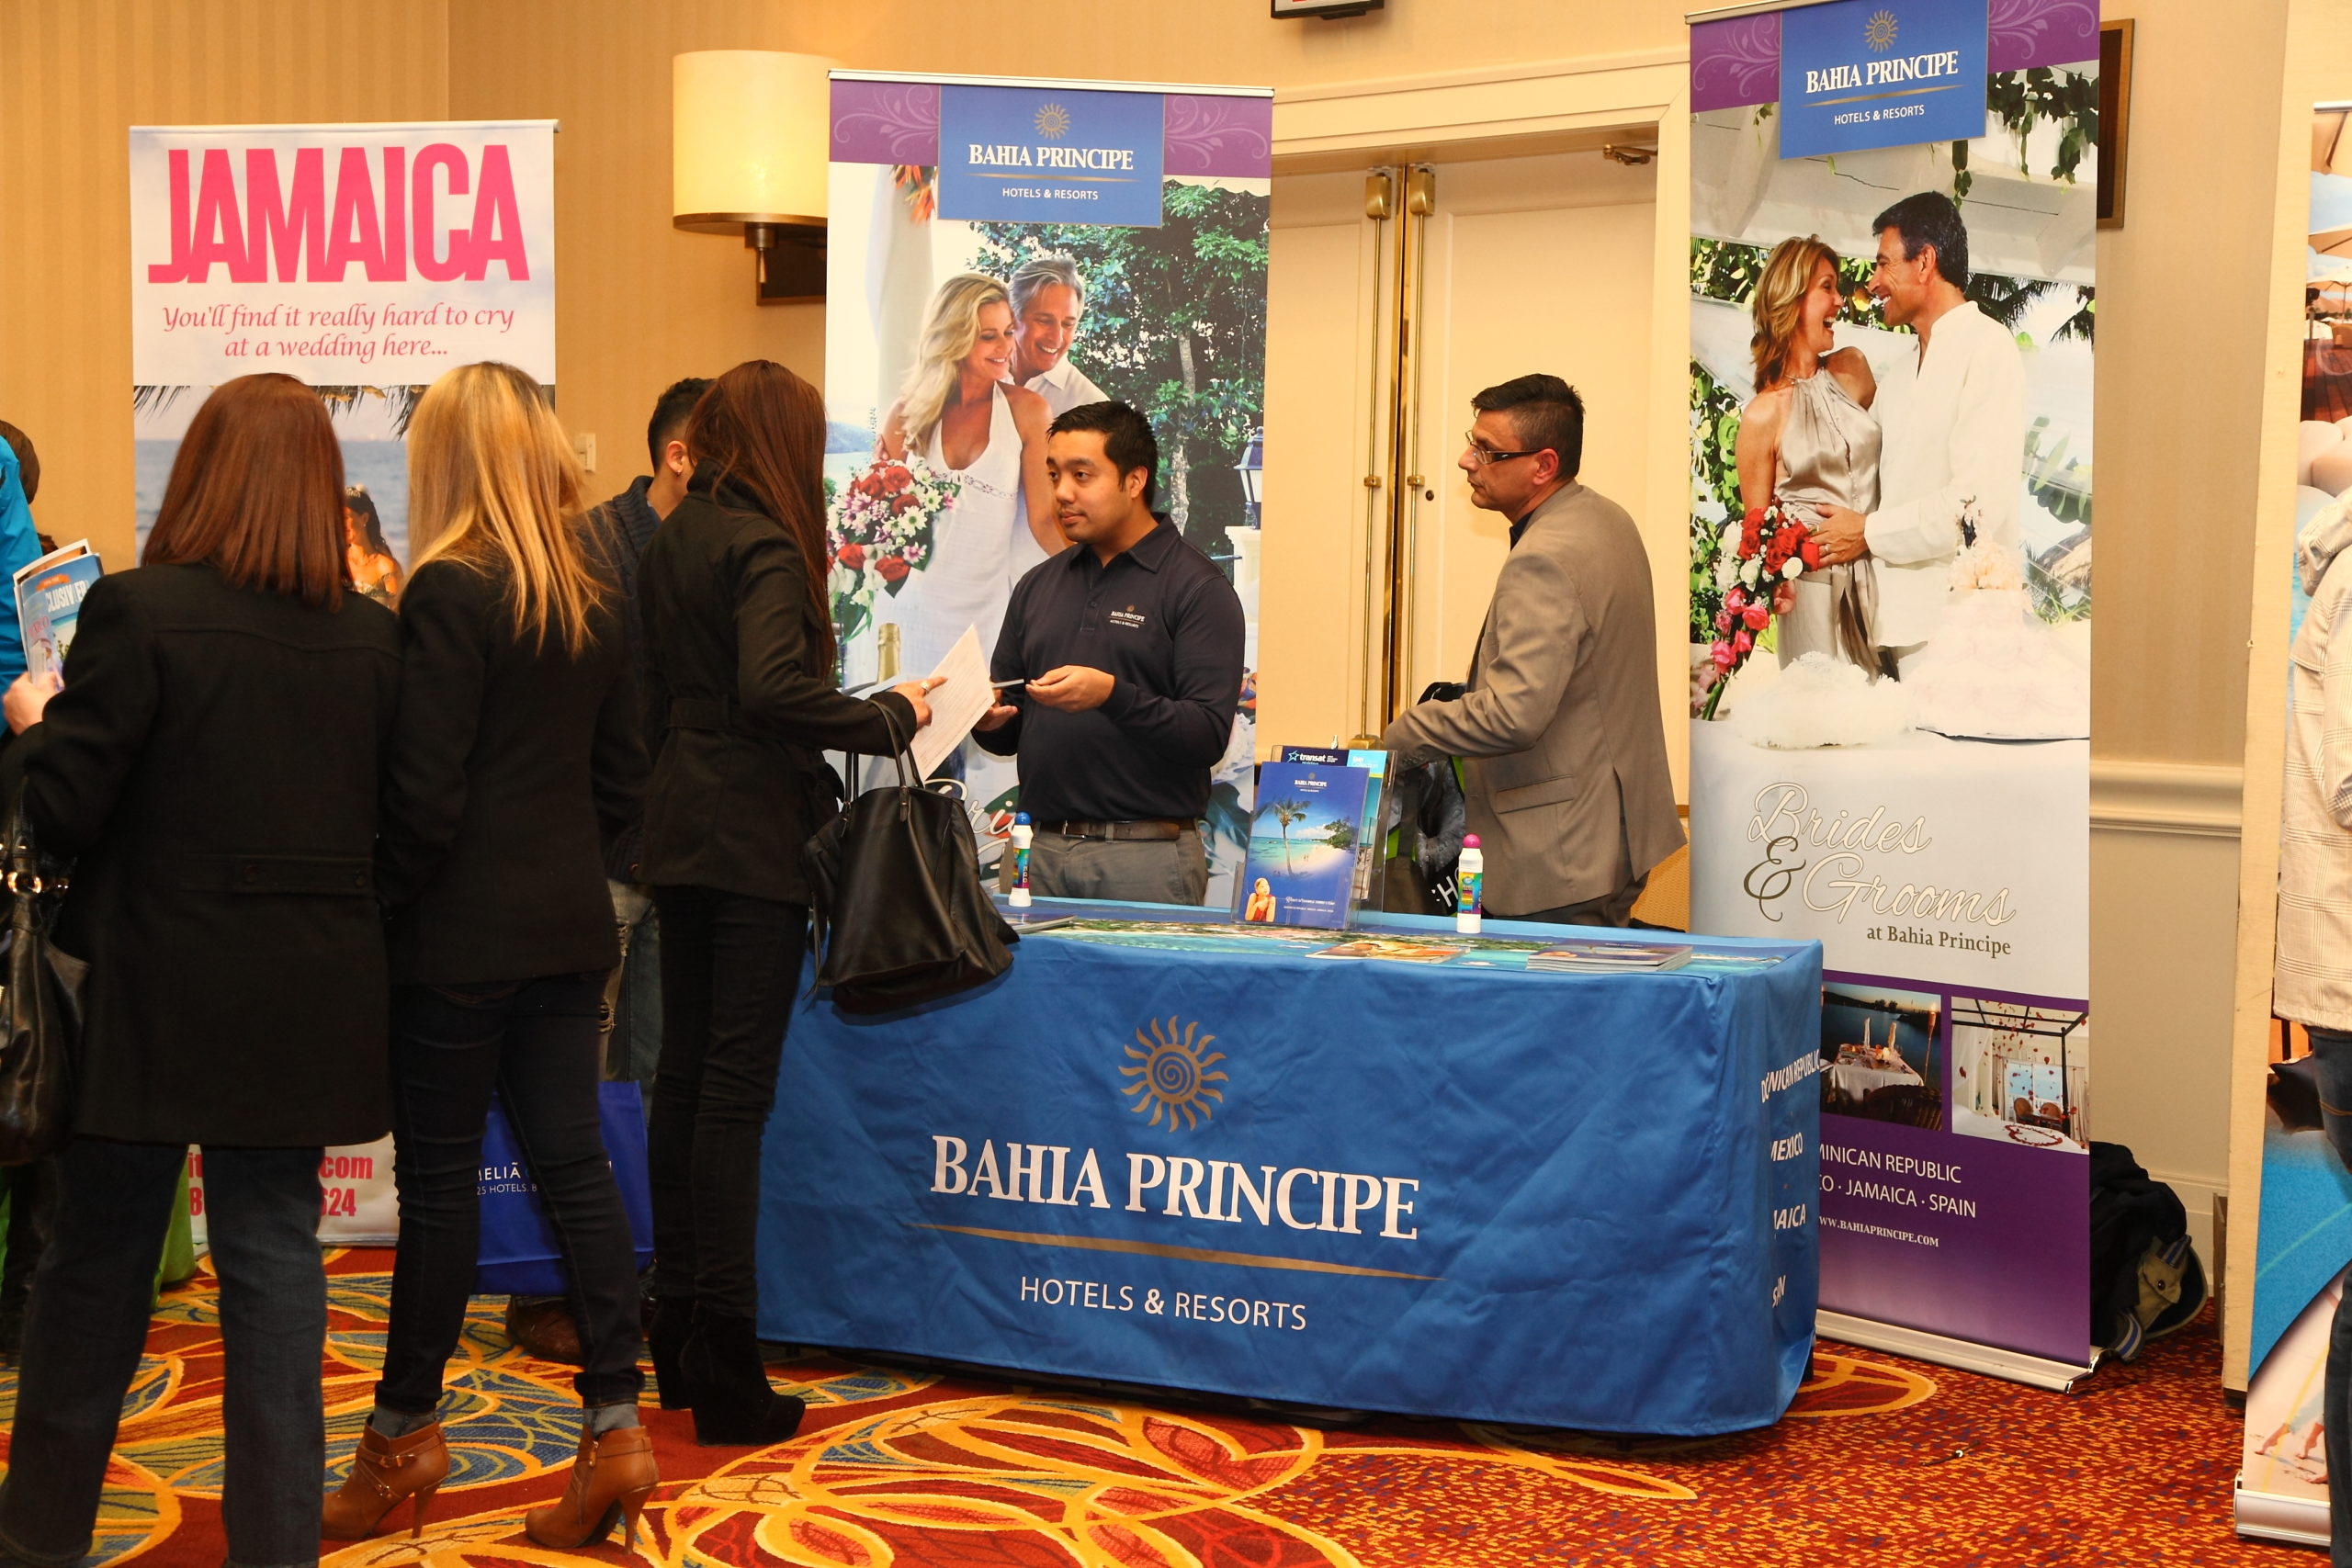 Romantic Planet Vacations partners with Bahia Principe Resorts in offering destination weddings and honeymoon packages from Canada